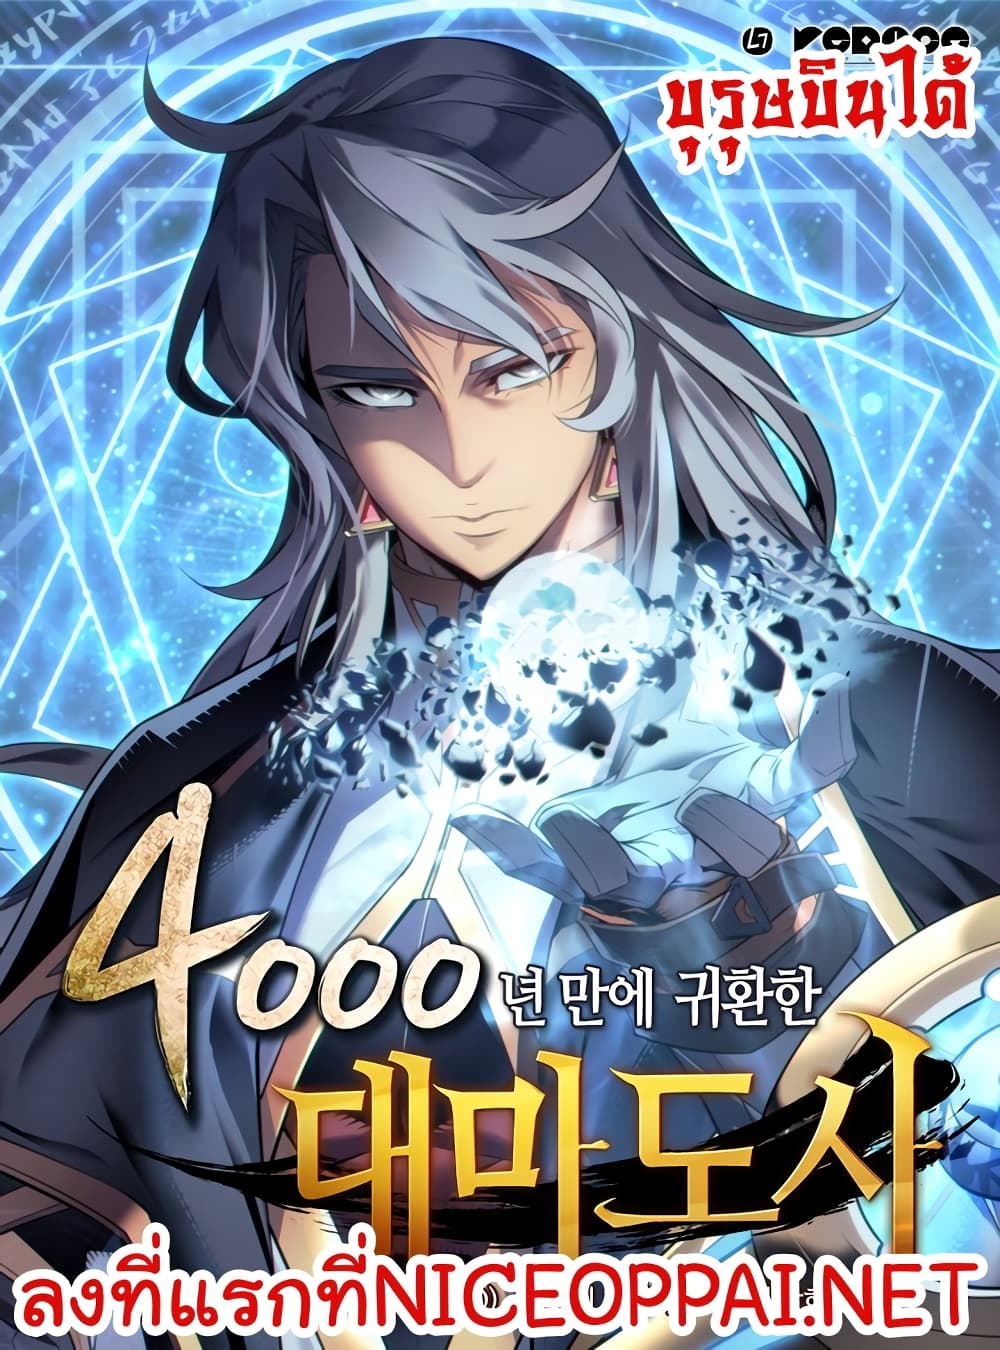 The Great Mage Returns After 4000 Years 45 (1)